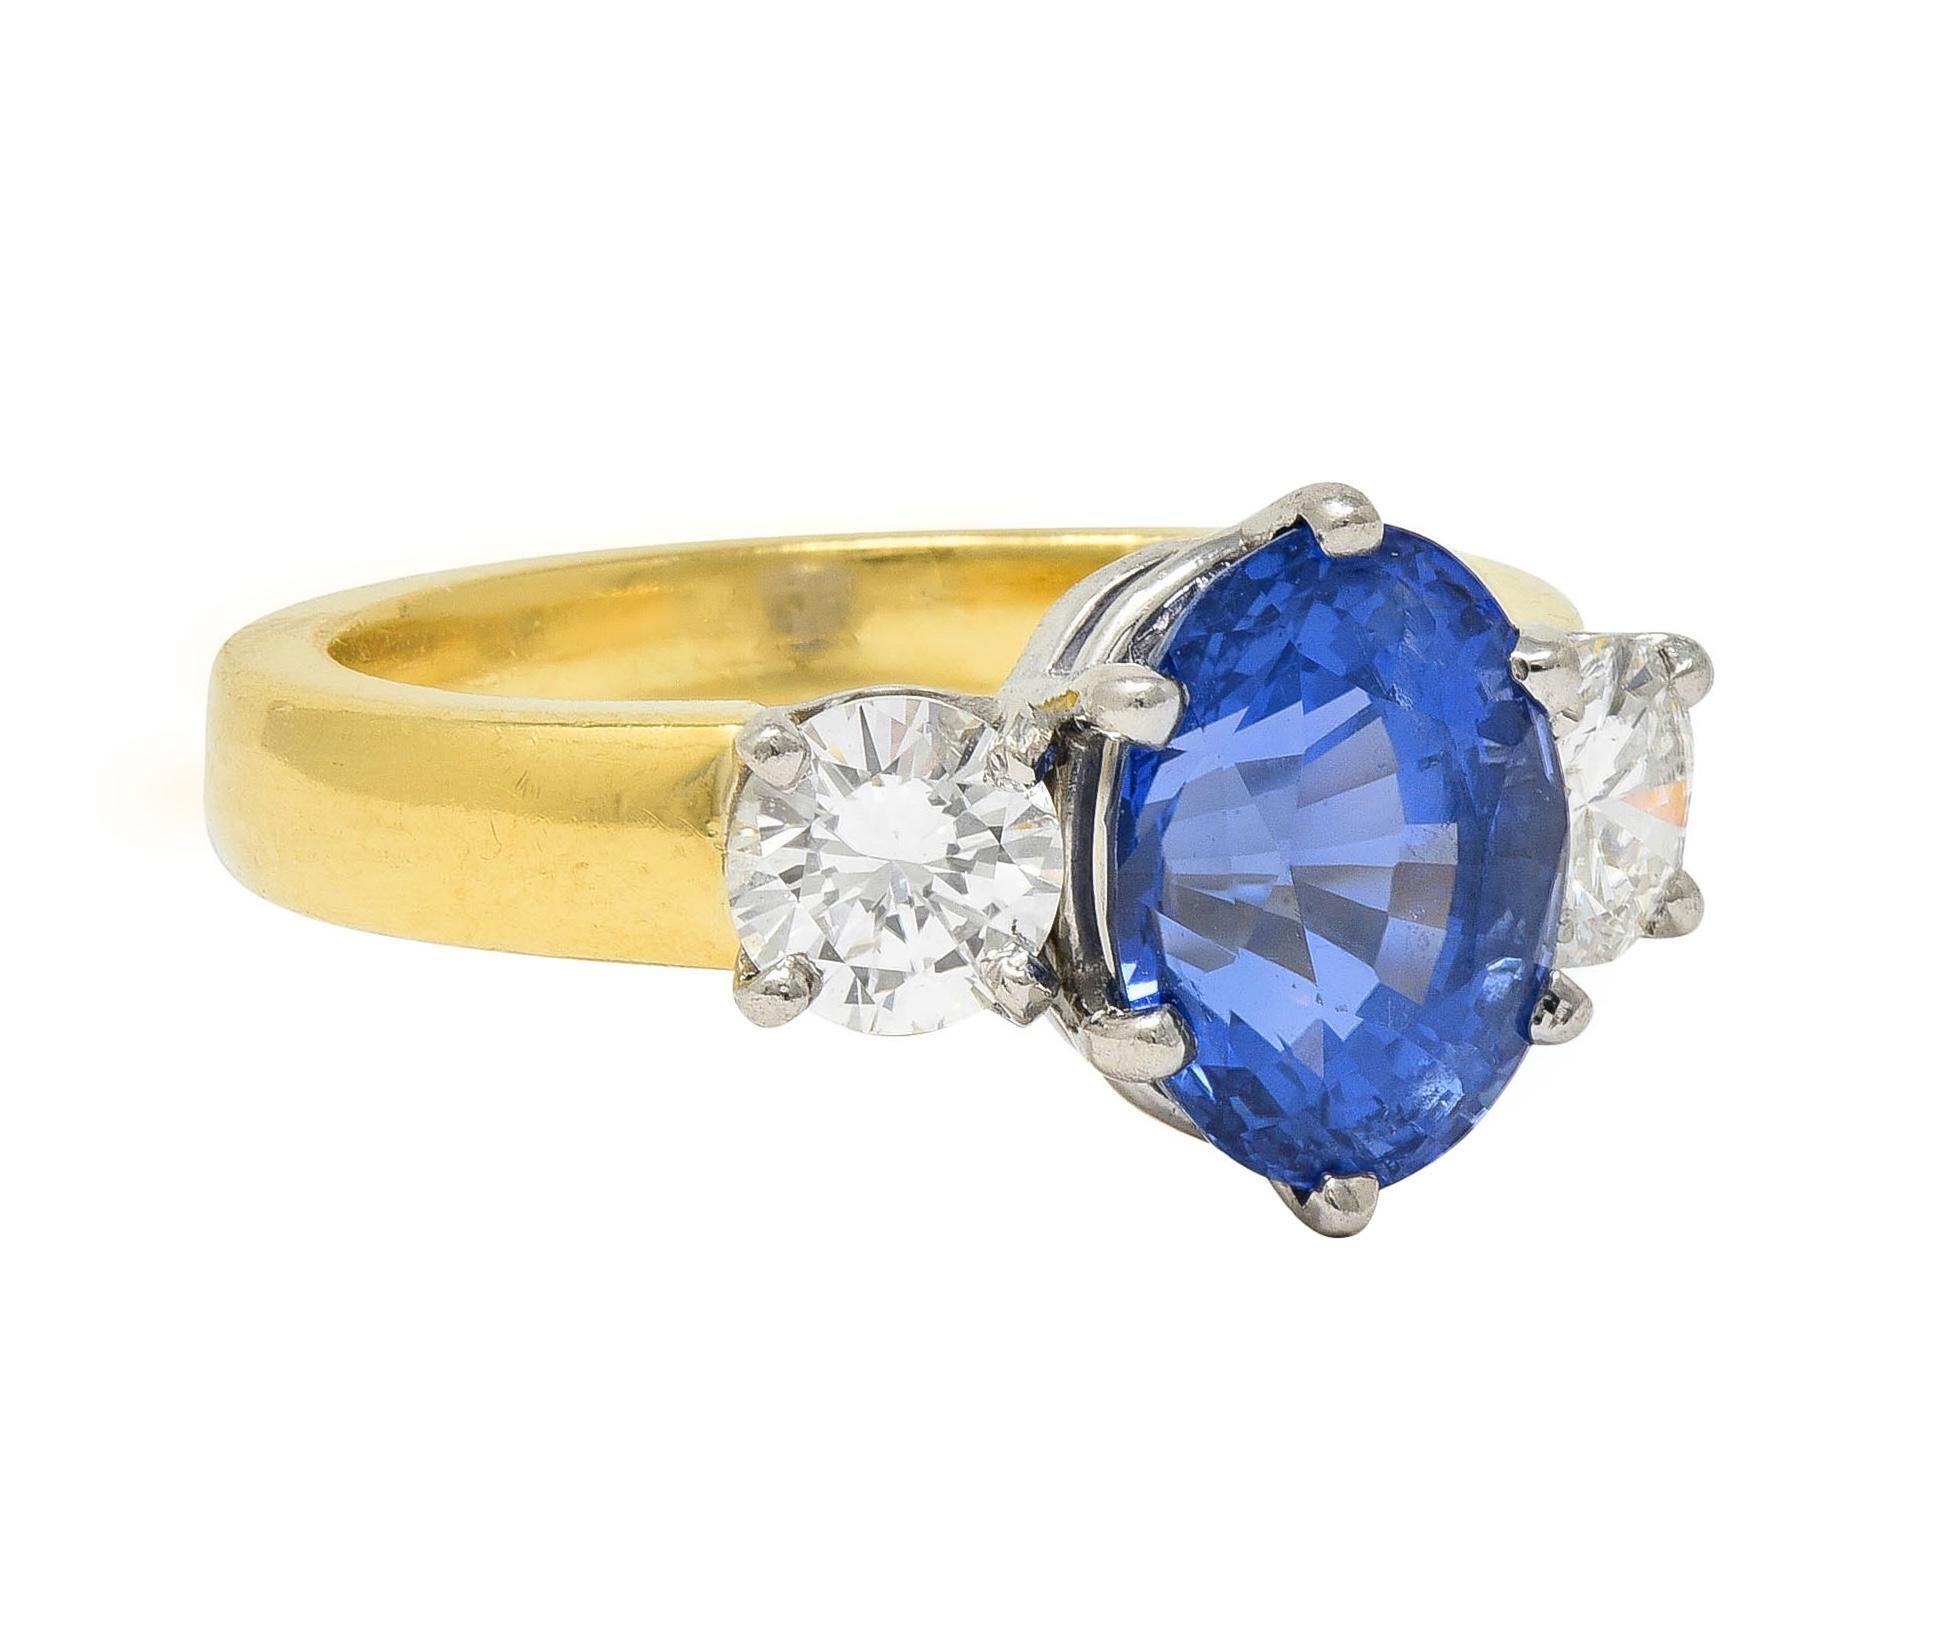 Centering an oval cut sapphire weighing 3.14 carats - transparent medium blue
Natural Sri Lankan in origin with no indications of heat treatment
Prong set in platinum and flanked by round brilliant cut diamonds 
Weighing approximately 0.72 carat